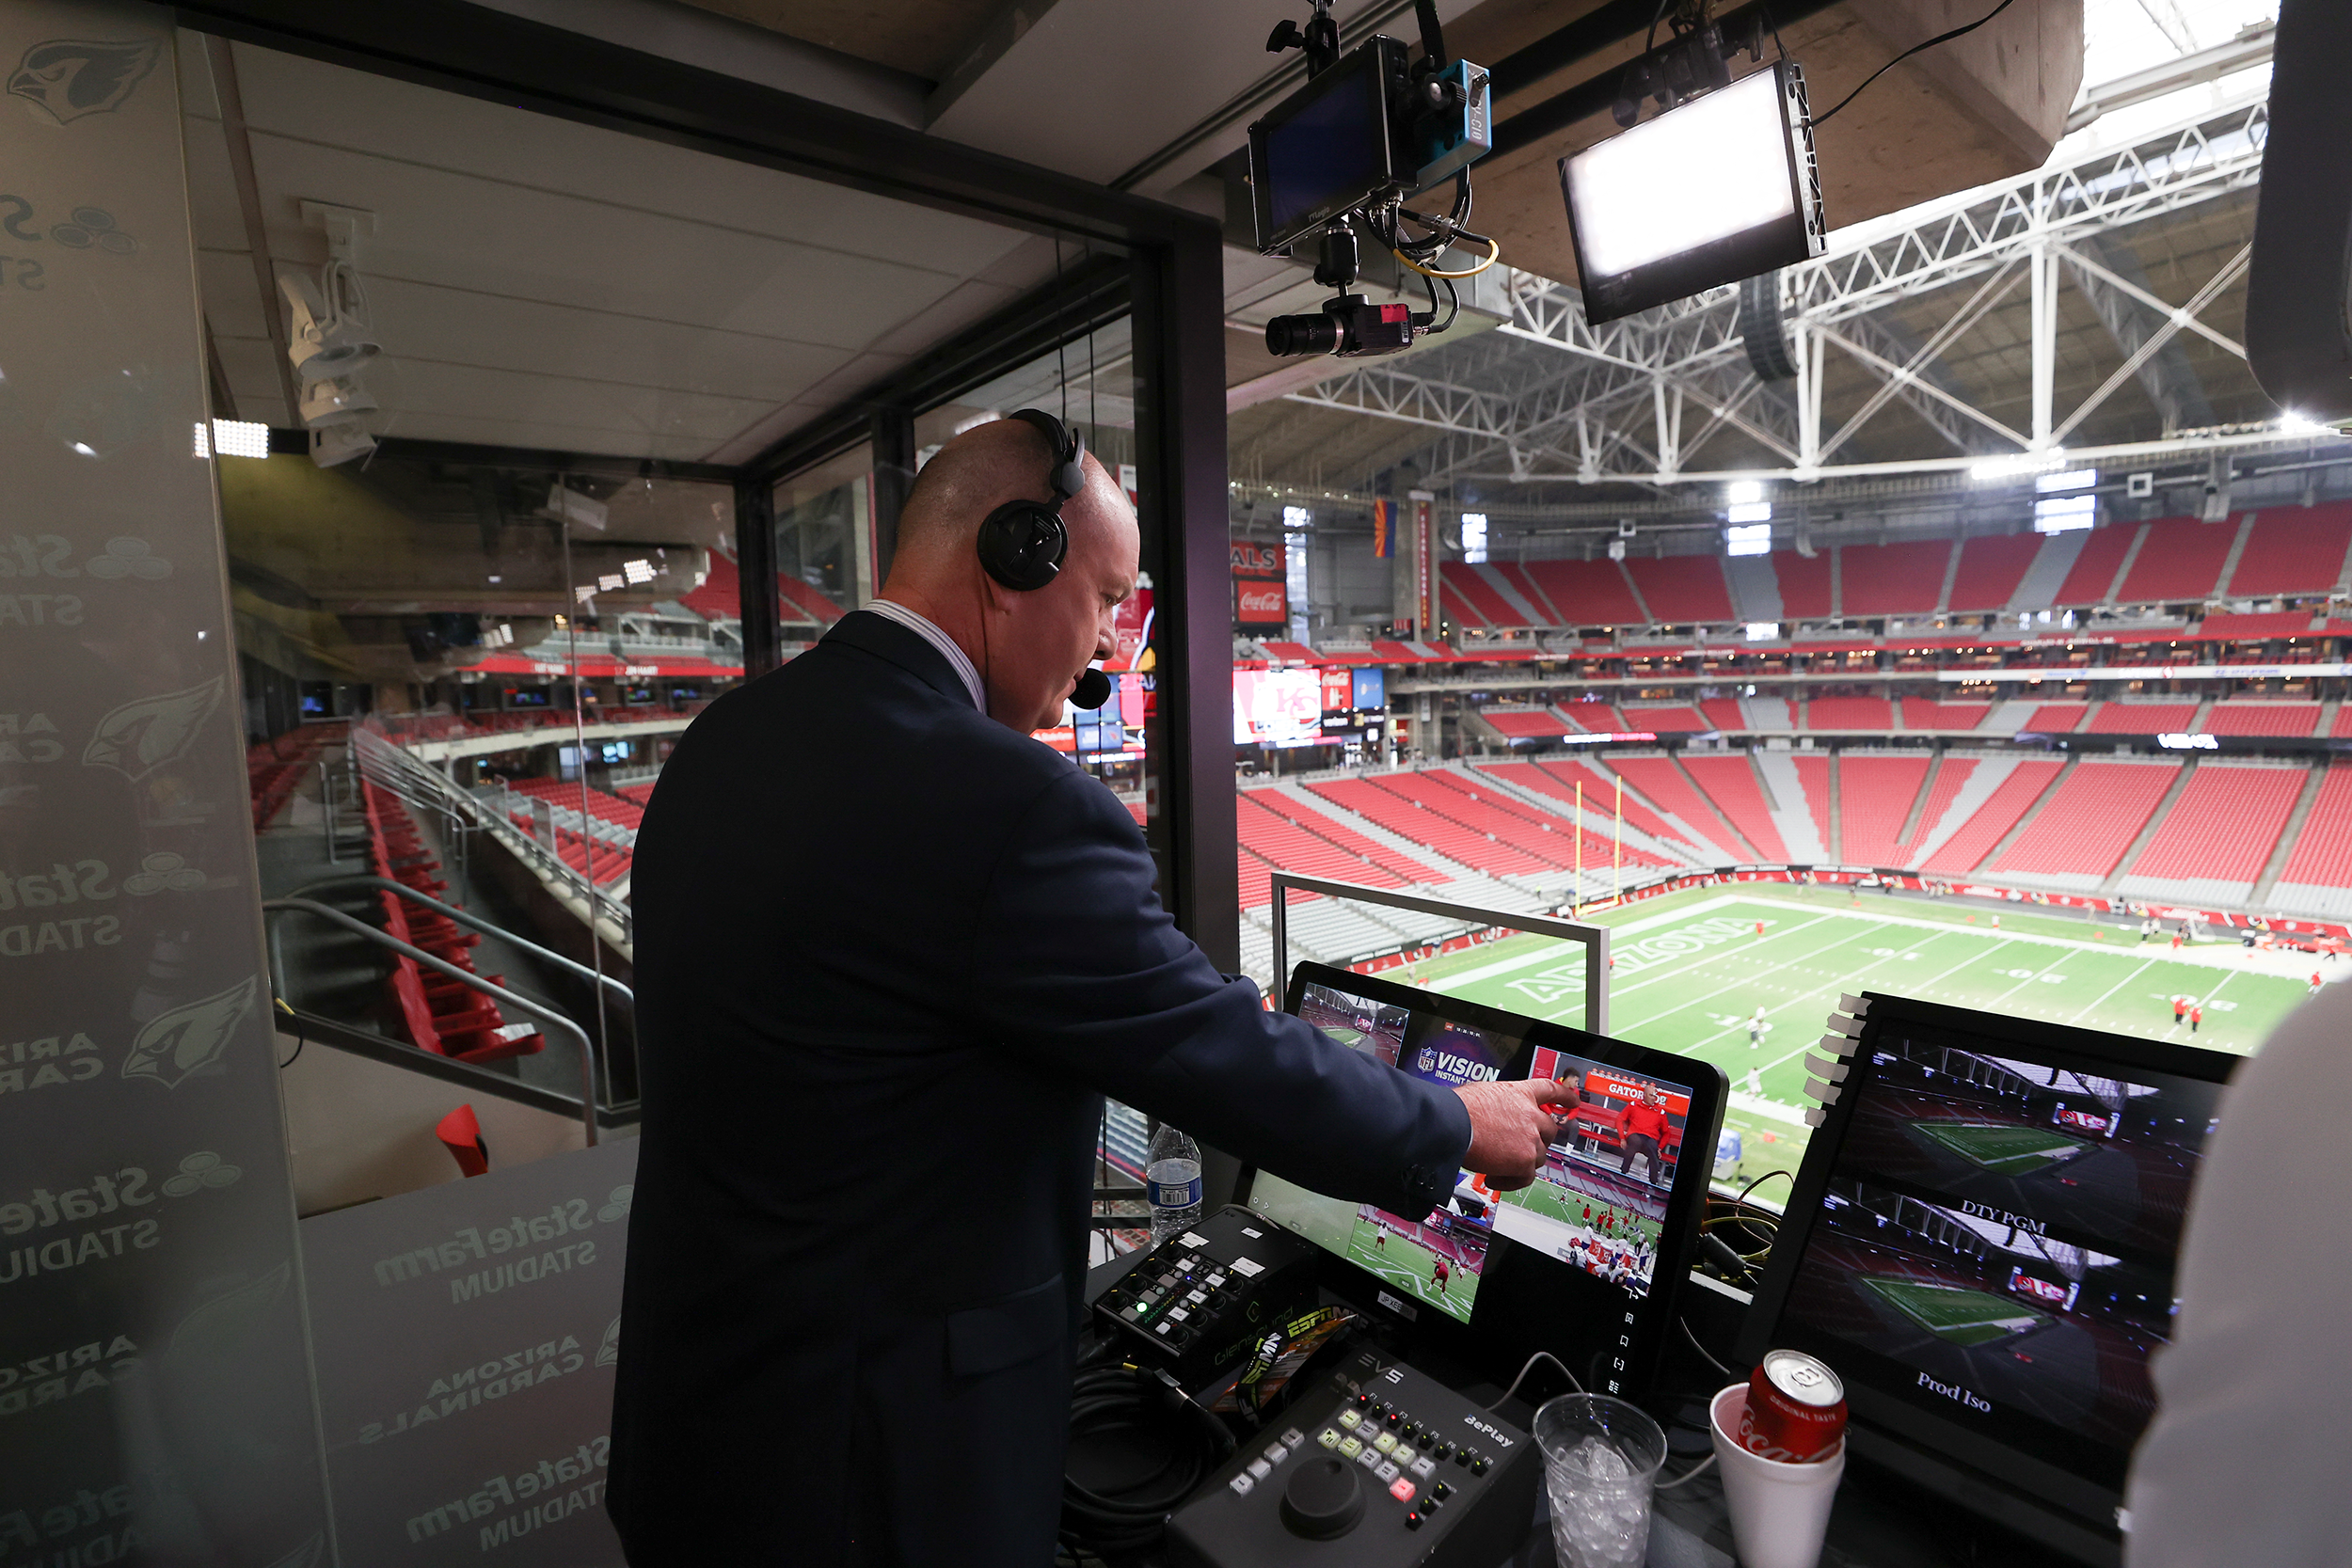 ESPN's Monday Night Football Delivers More than 12.4 Million Viewers,  Driving 9% Year-Over-Year Audience Growth - ESPN Press Room U.S.